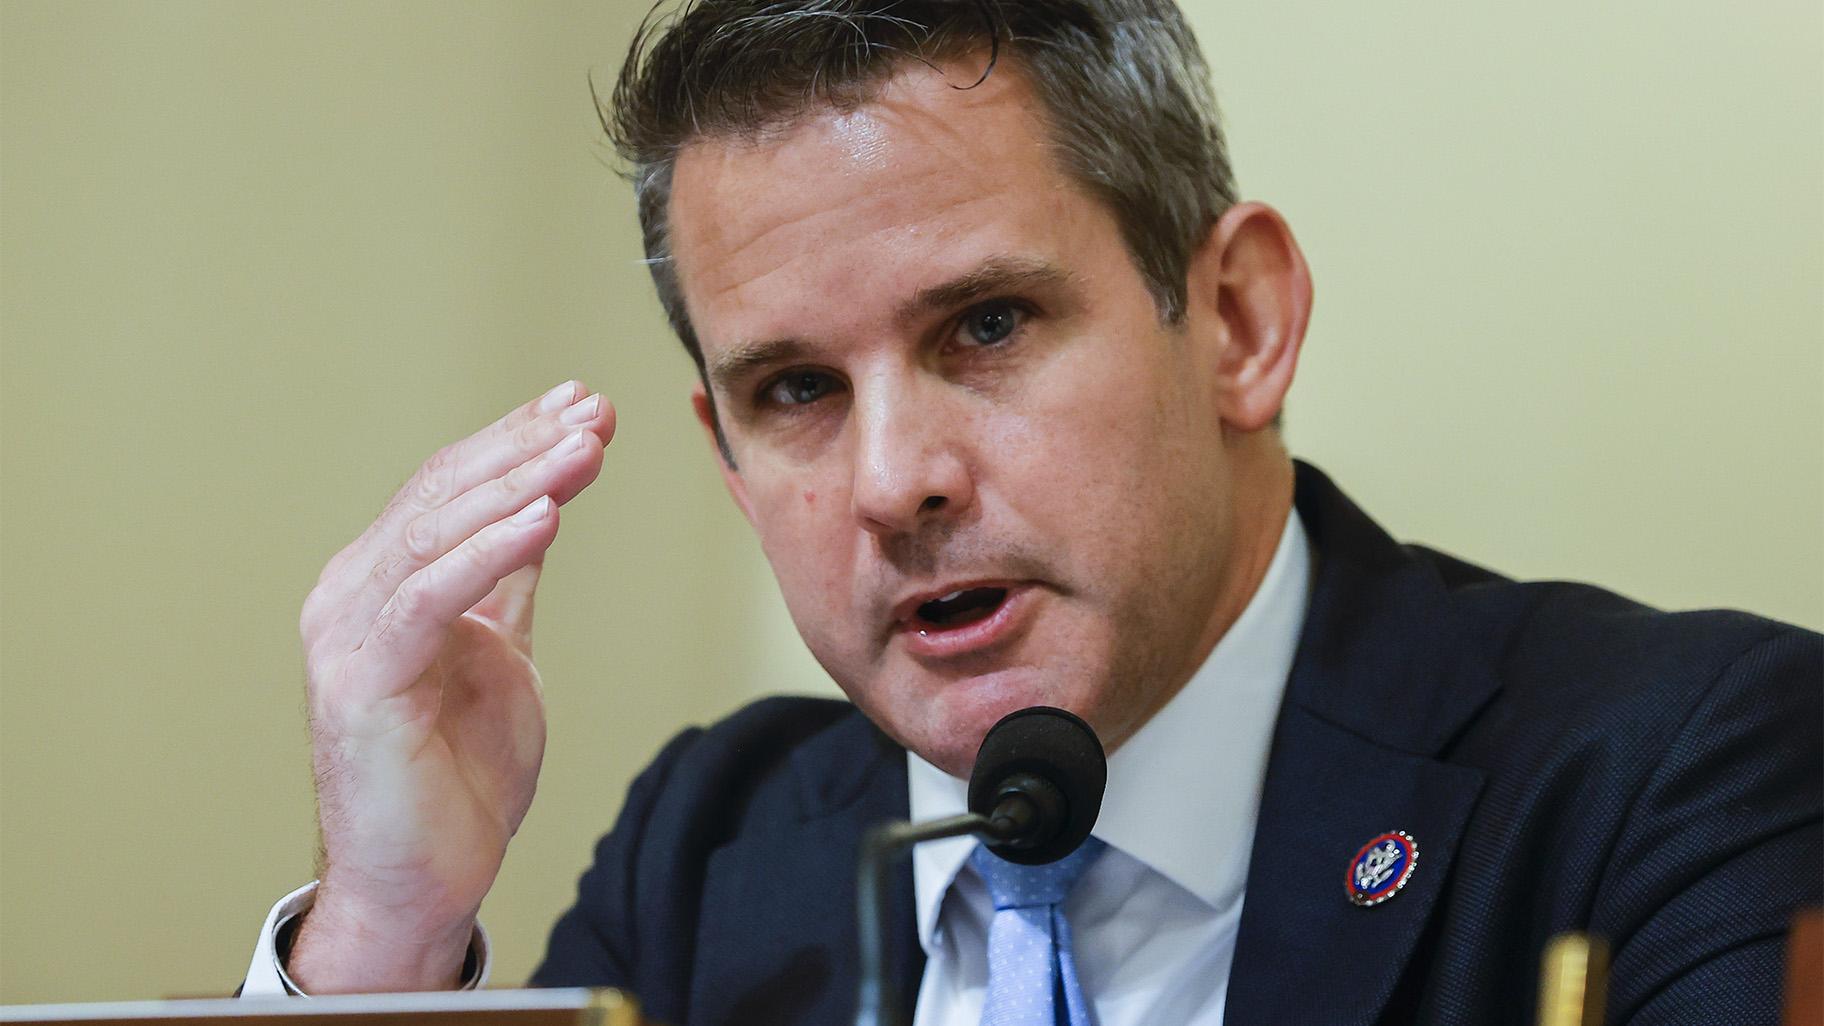 Rep. Adam Kinzinger, R-Ill., speaks during a House select committee hearing on the Jan. 6 attack on Capitol Hill in Washington, Tuesday, July 27, 2021. (Jim Bourg / Pool via AP)